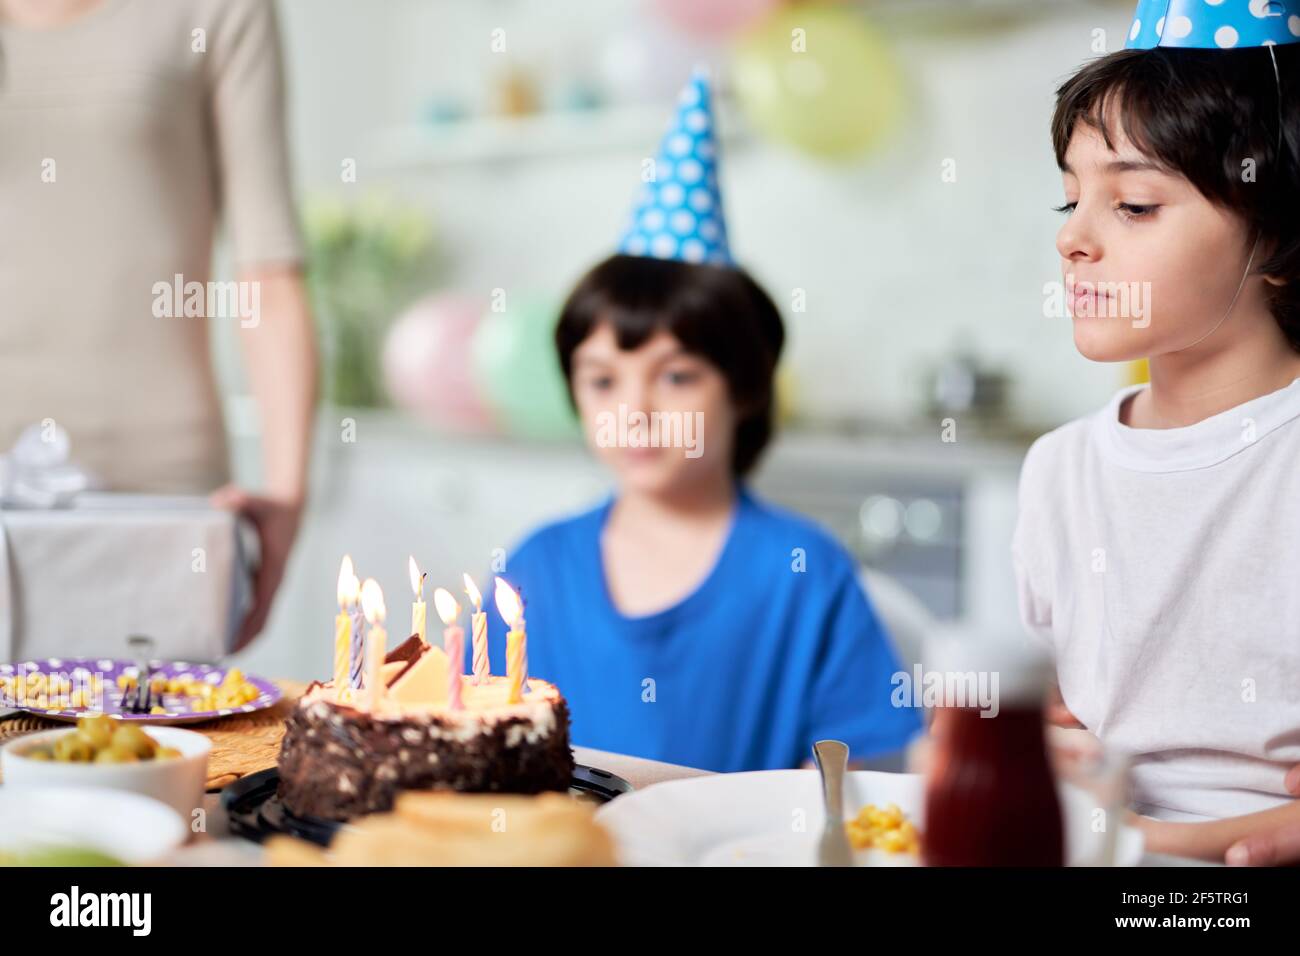 Happy moment. Close up of little hispanic boy looking at birthday cake, making a wish while getting ready for blowing candles. Latin family Stock Photo